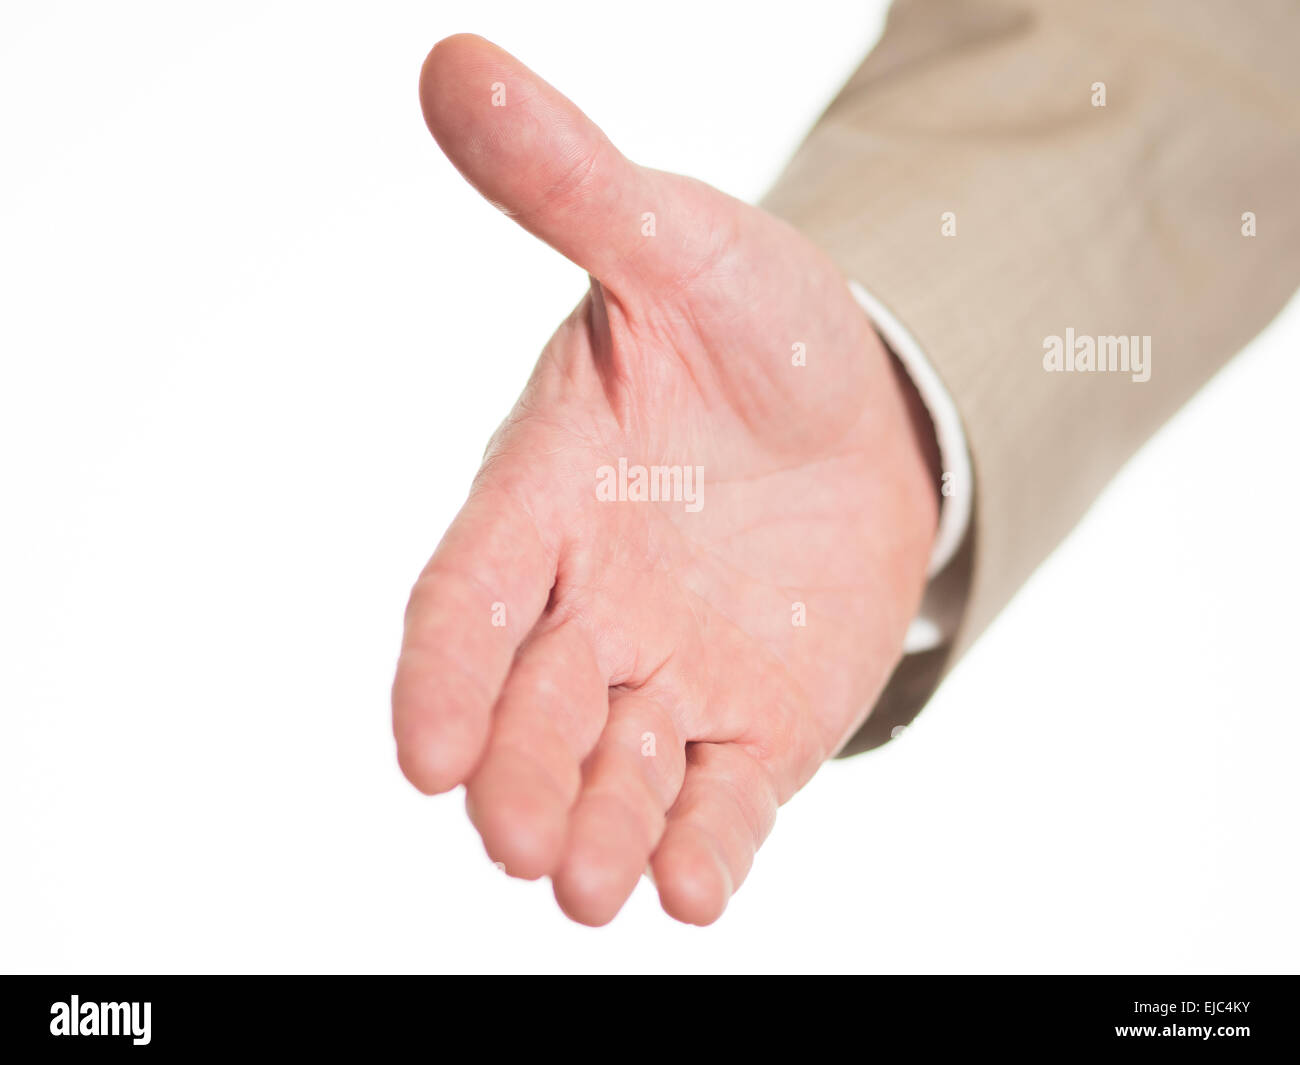 Outstretched hand to welcome Stock Photo